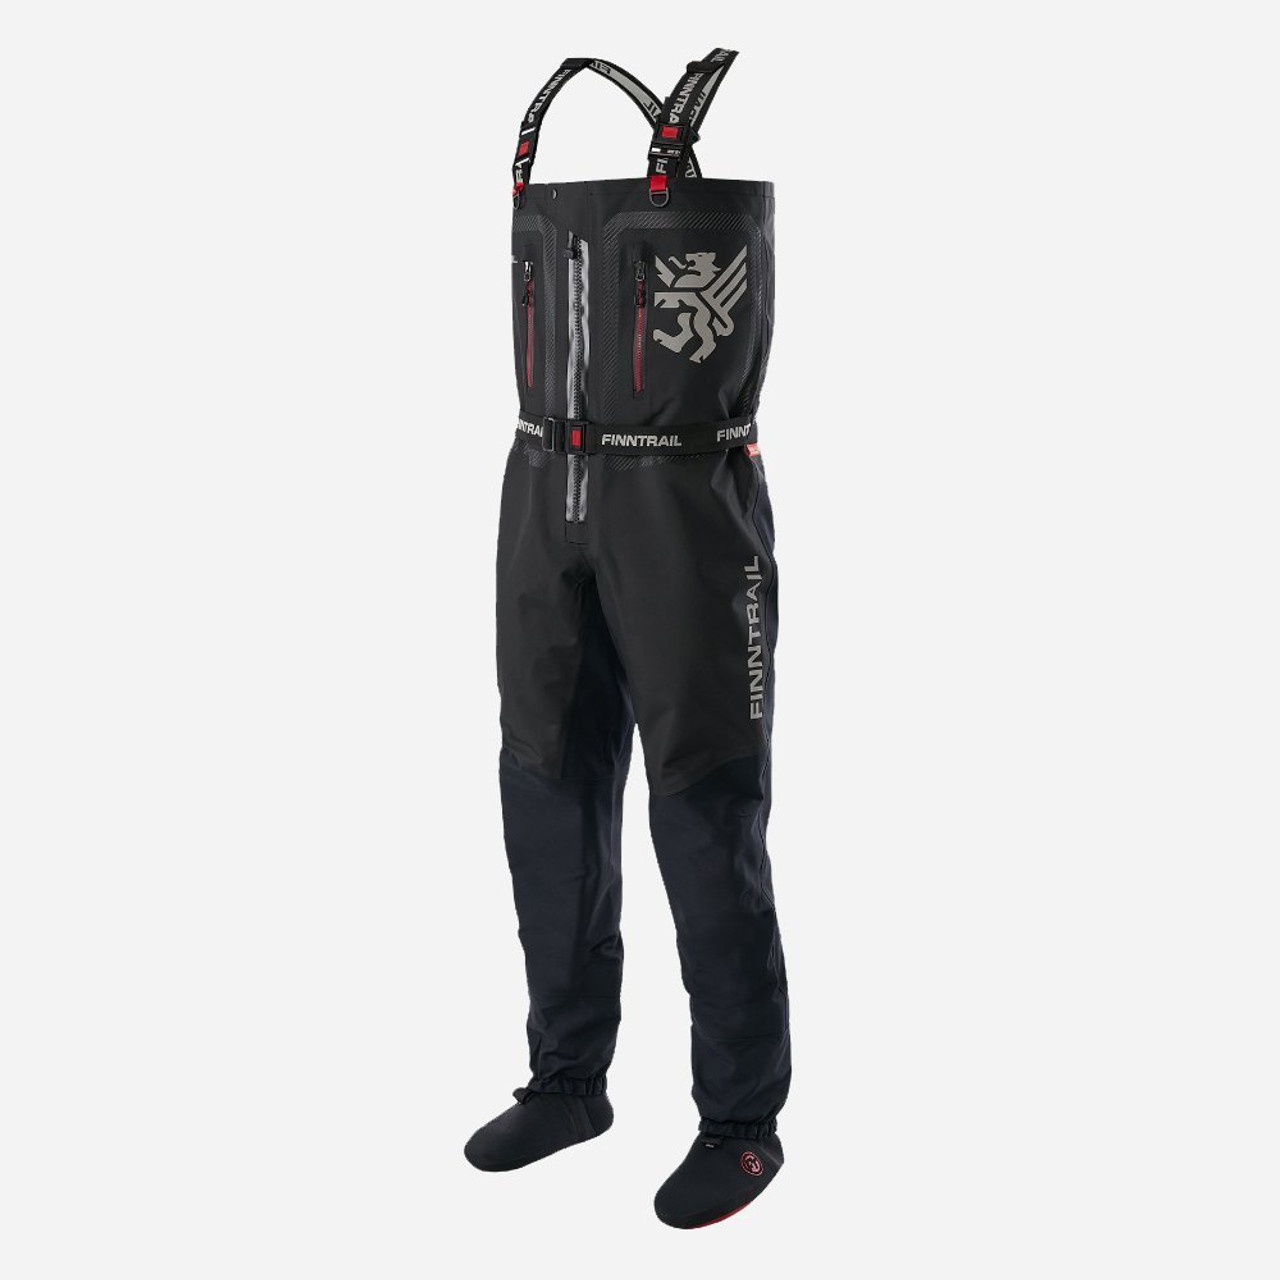  Finntrail advanced stockingfoot waders for ATV riding